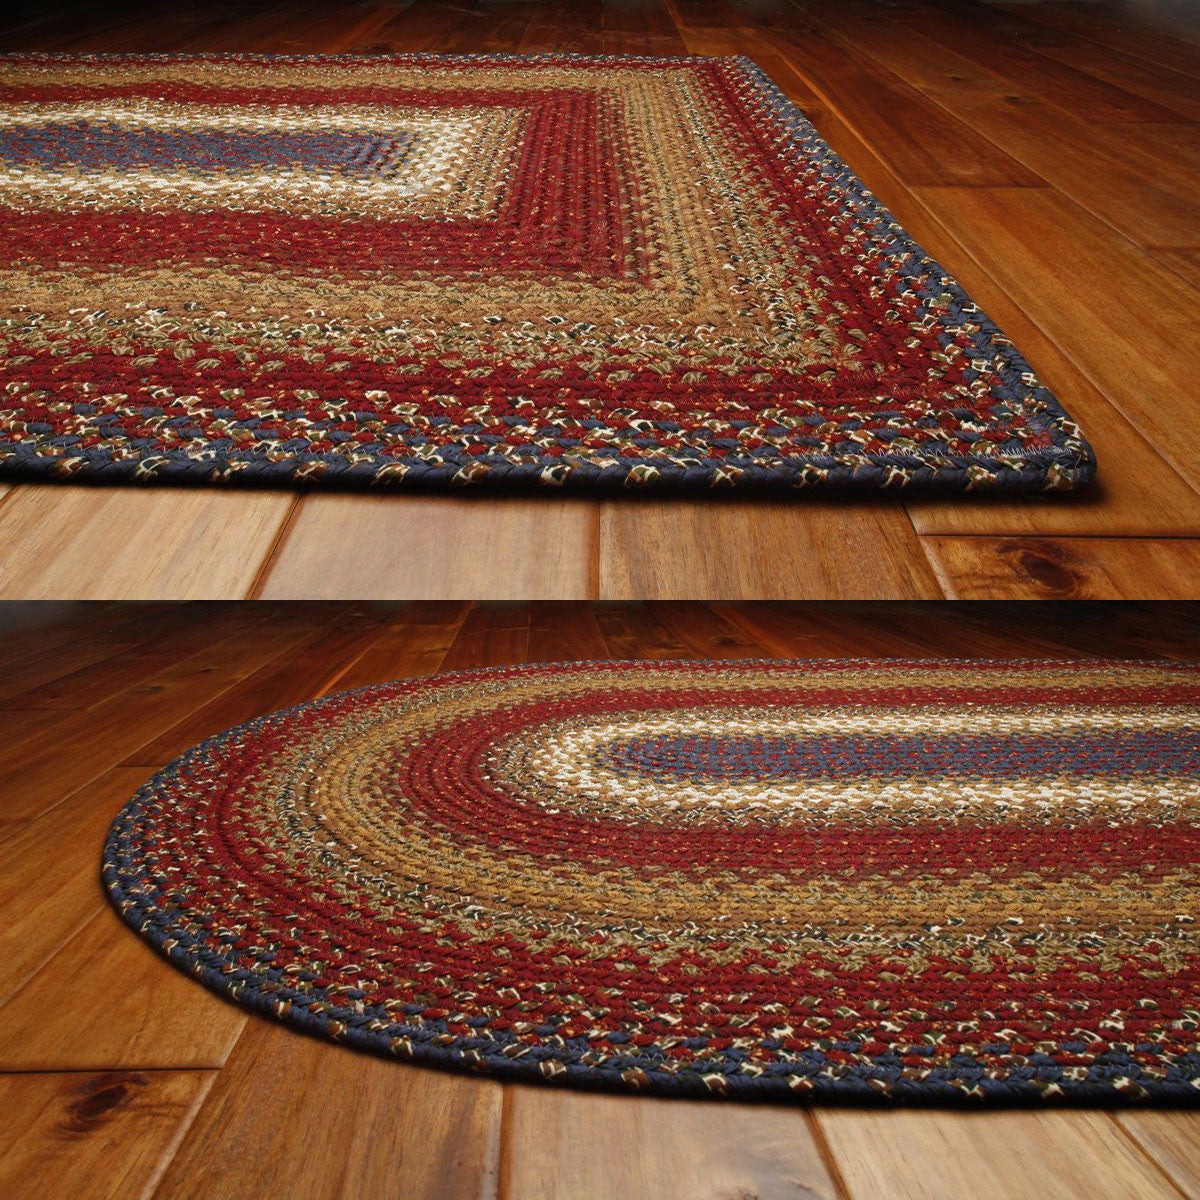 Log Cabin Step Cotton Braided Rug  Country Primitive Braided Rug